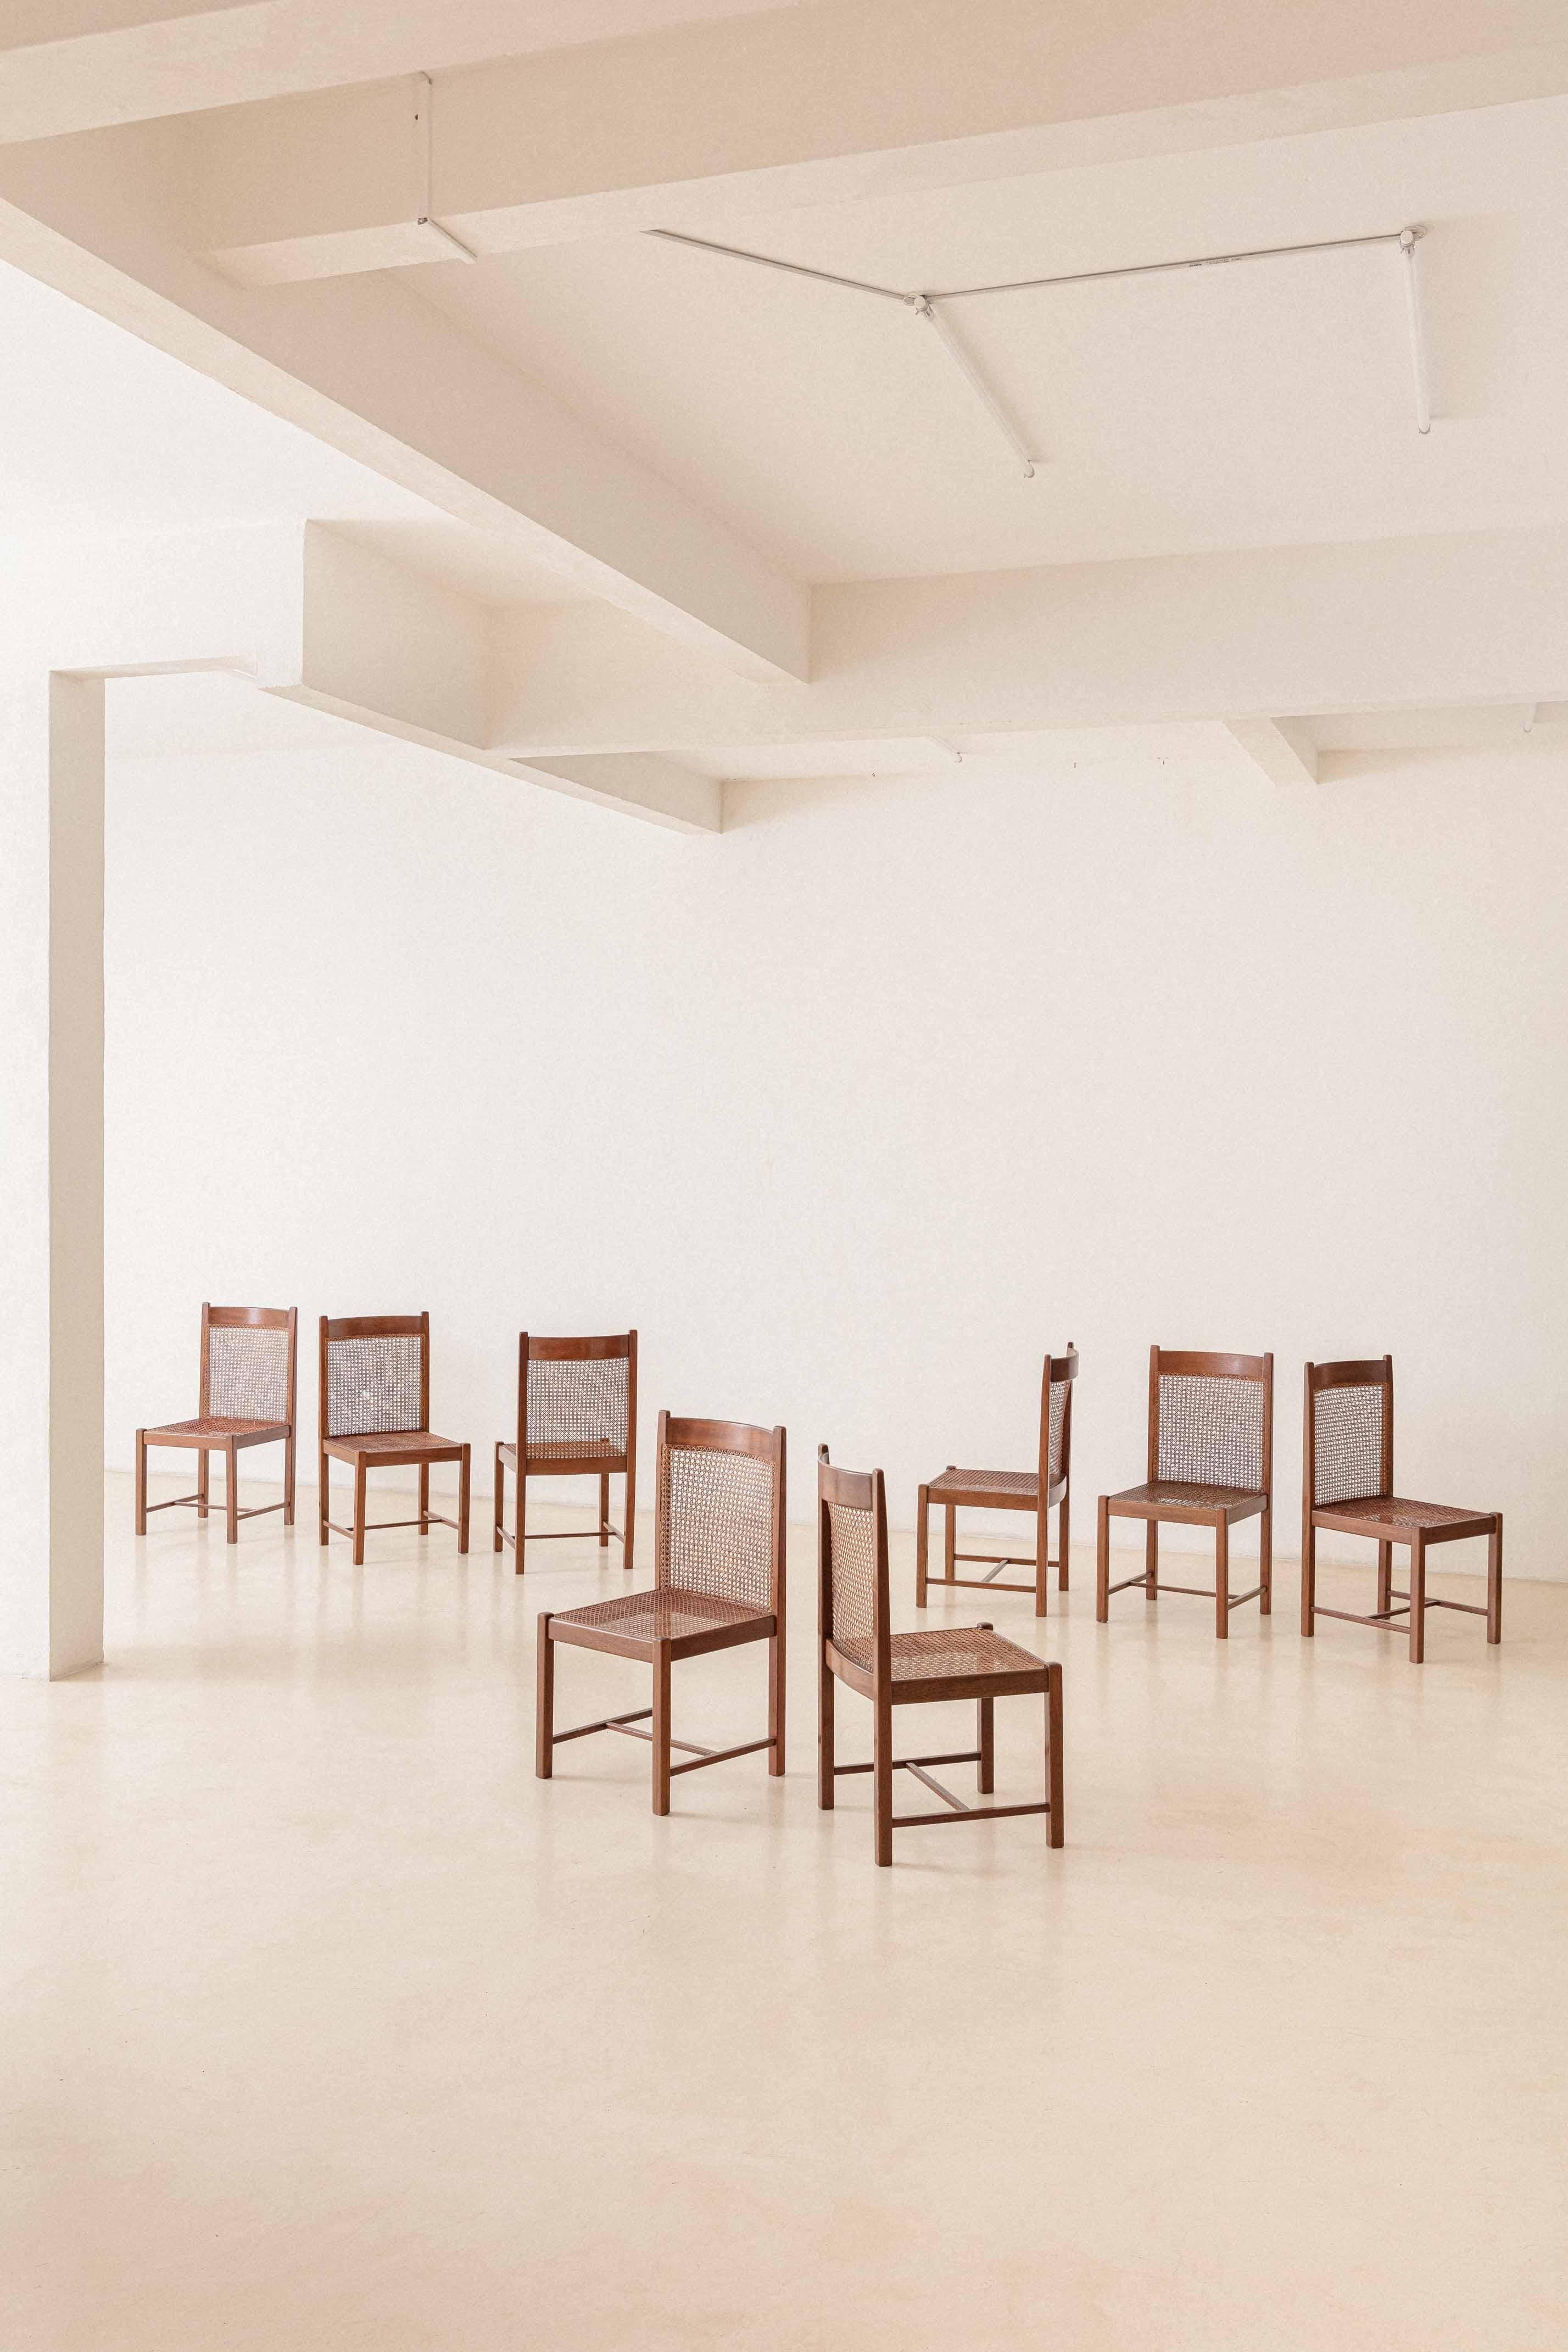 Cane Brazilian Rosewood Dining Chairs by Fatima Arquitetura Interiores 'FAI', 1960s For Sale